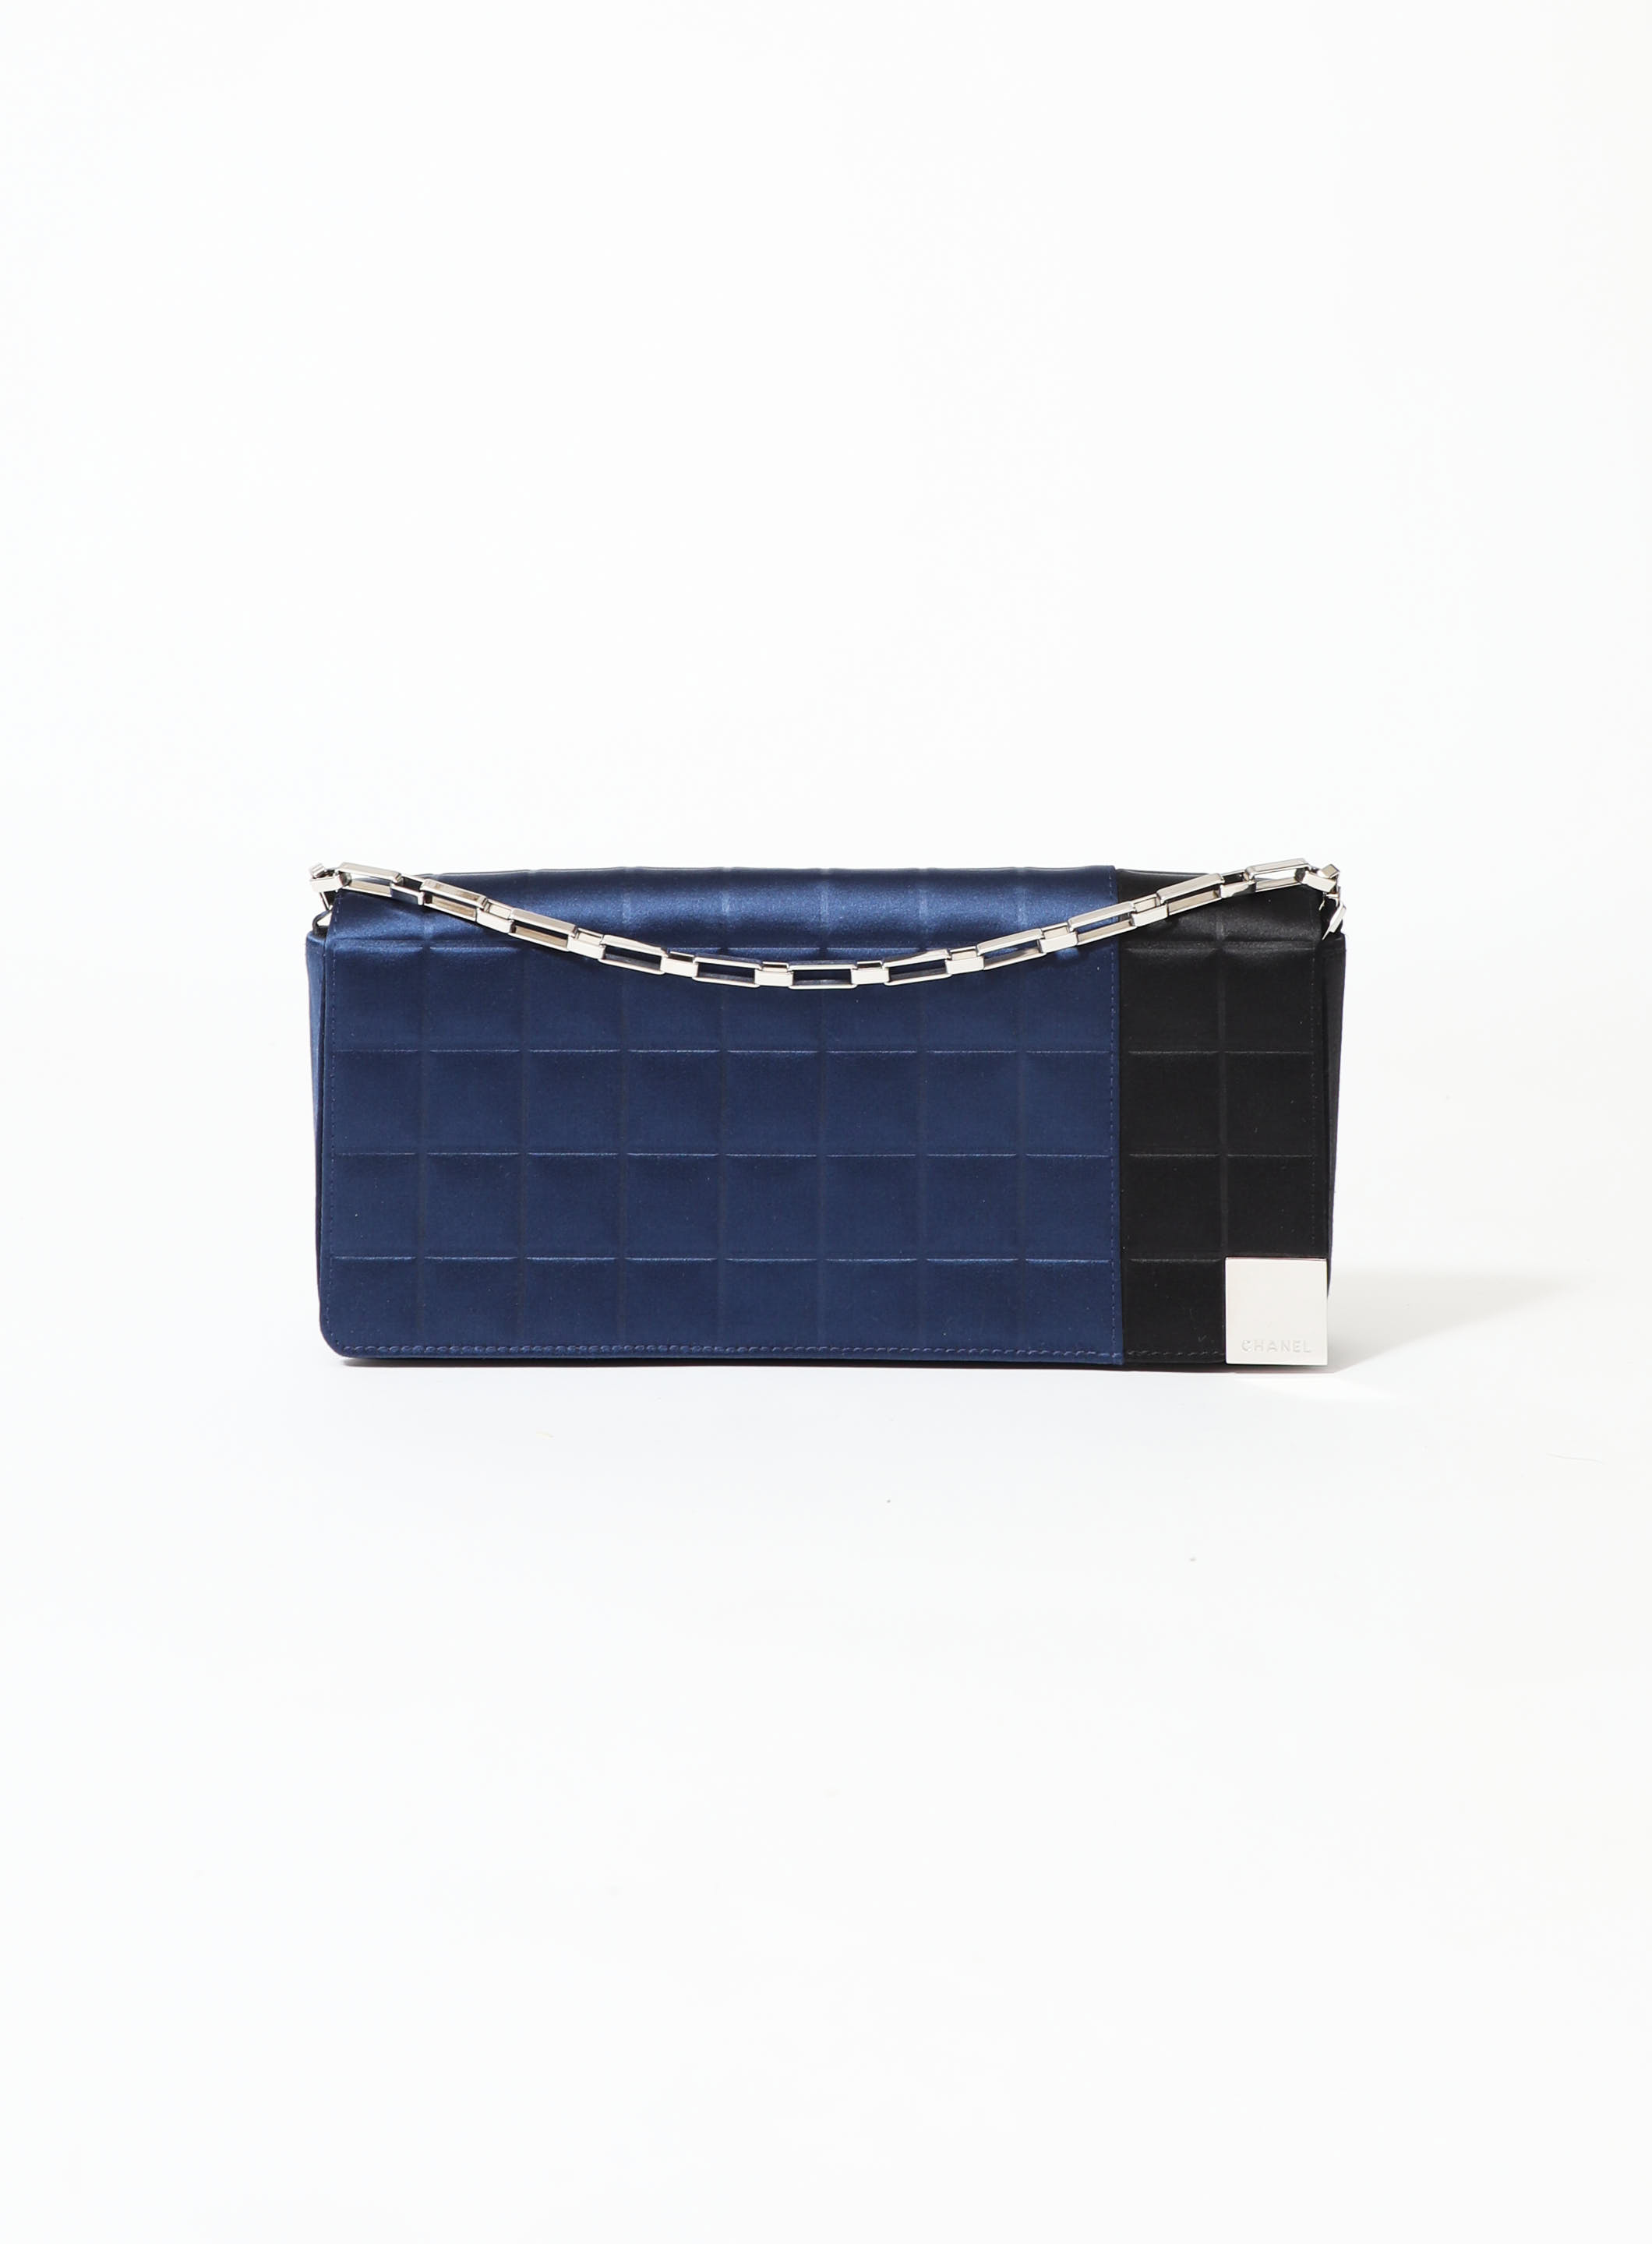 Chanel Woc Quilted Leather Crossbody Wallet Tricolor